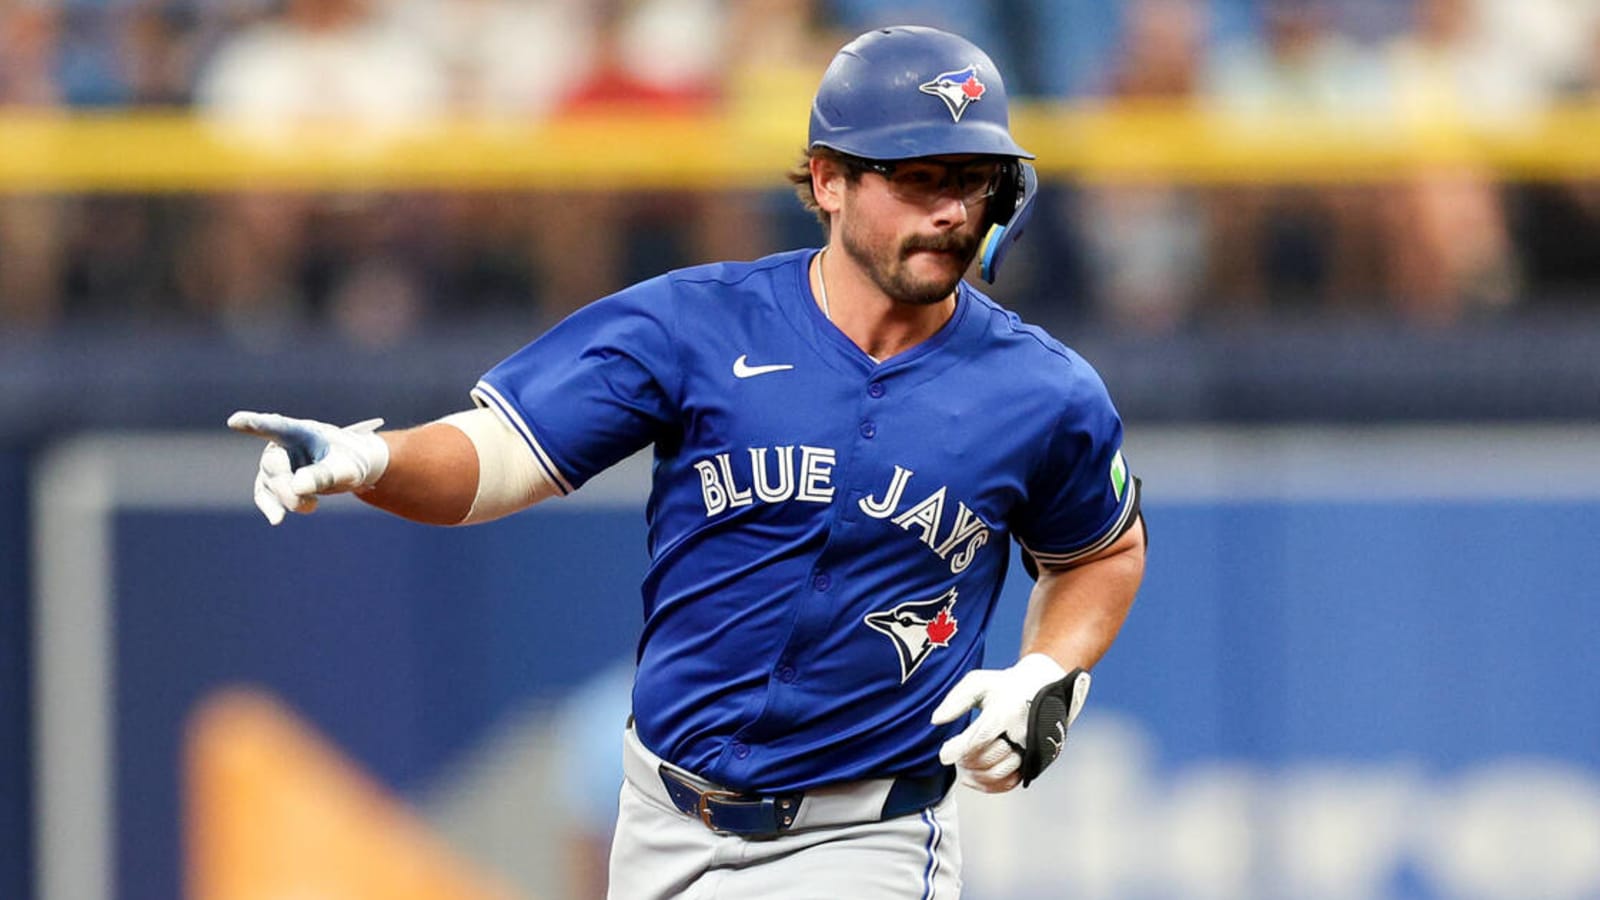 Blue Jays applying player development lessons from last year’s success stories